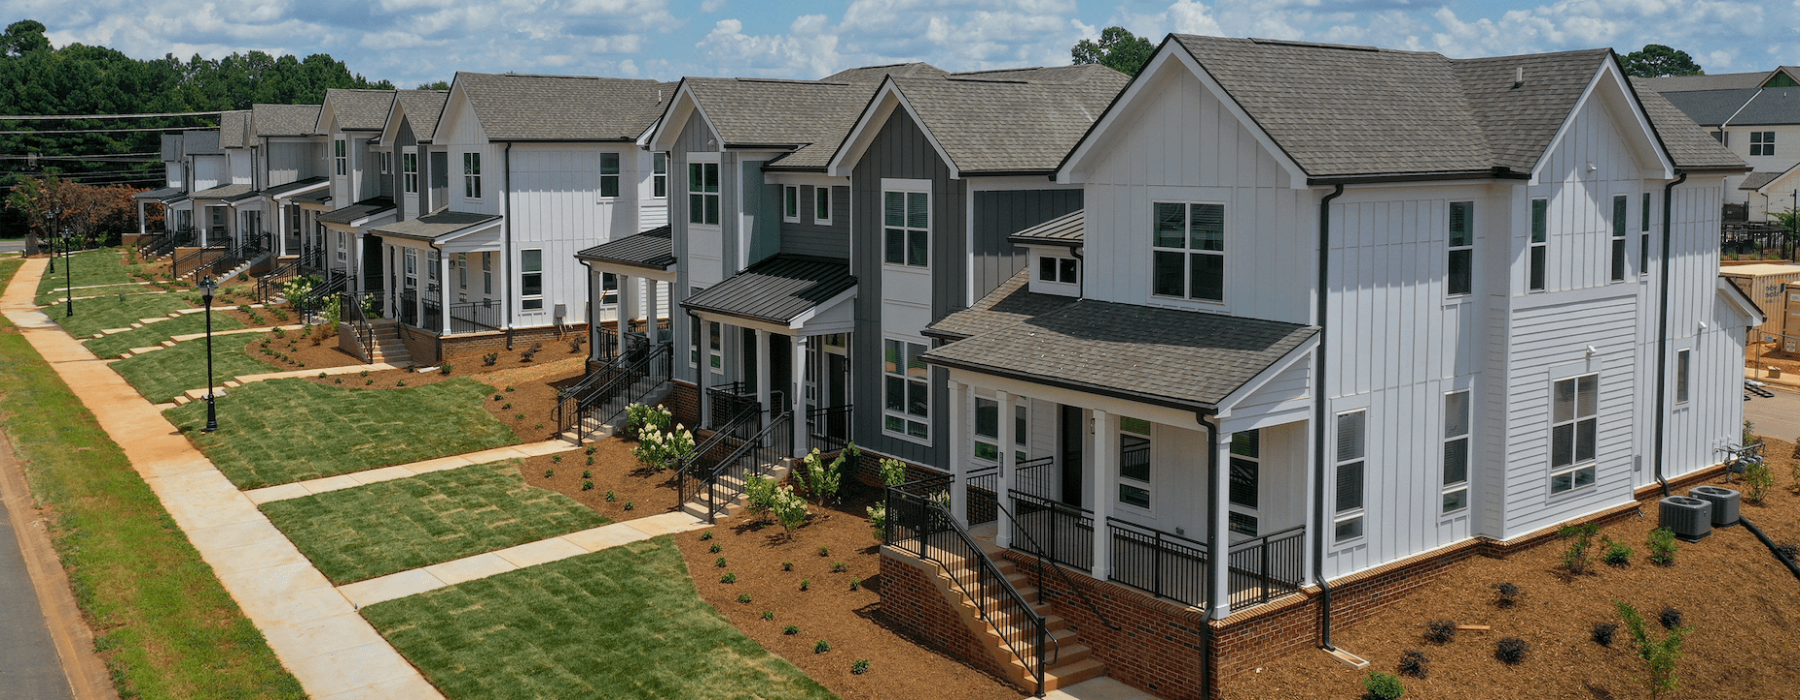 Welcome to Townhomes at Bridlestone in Pineville, North Carolina